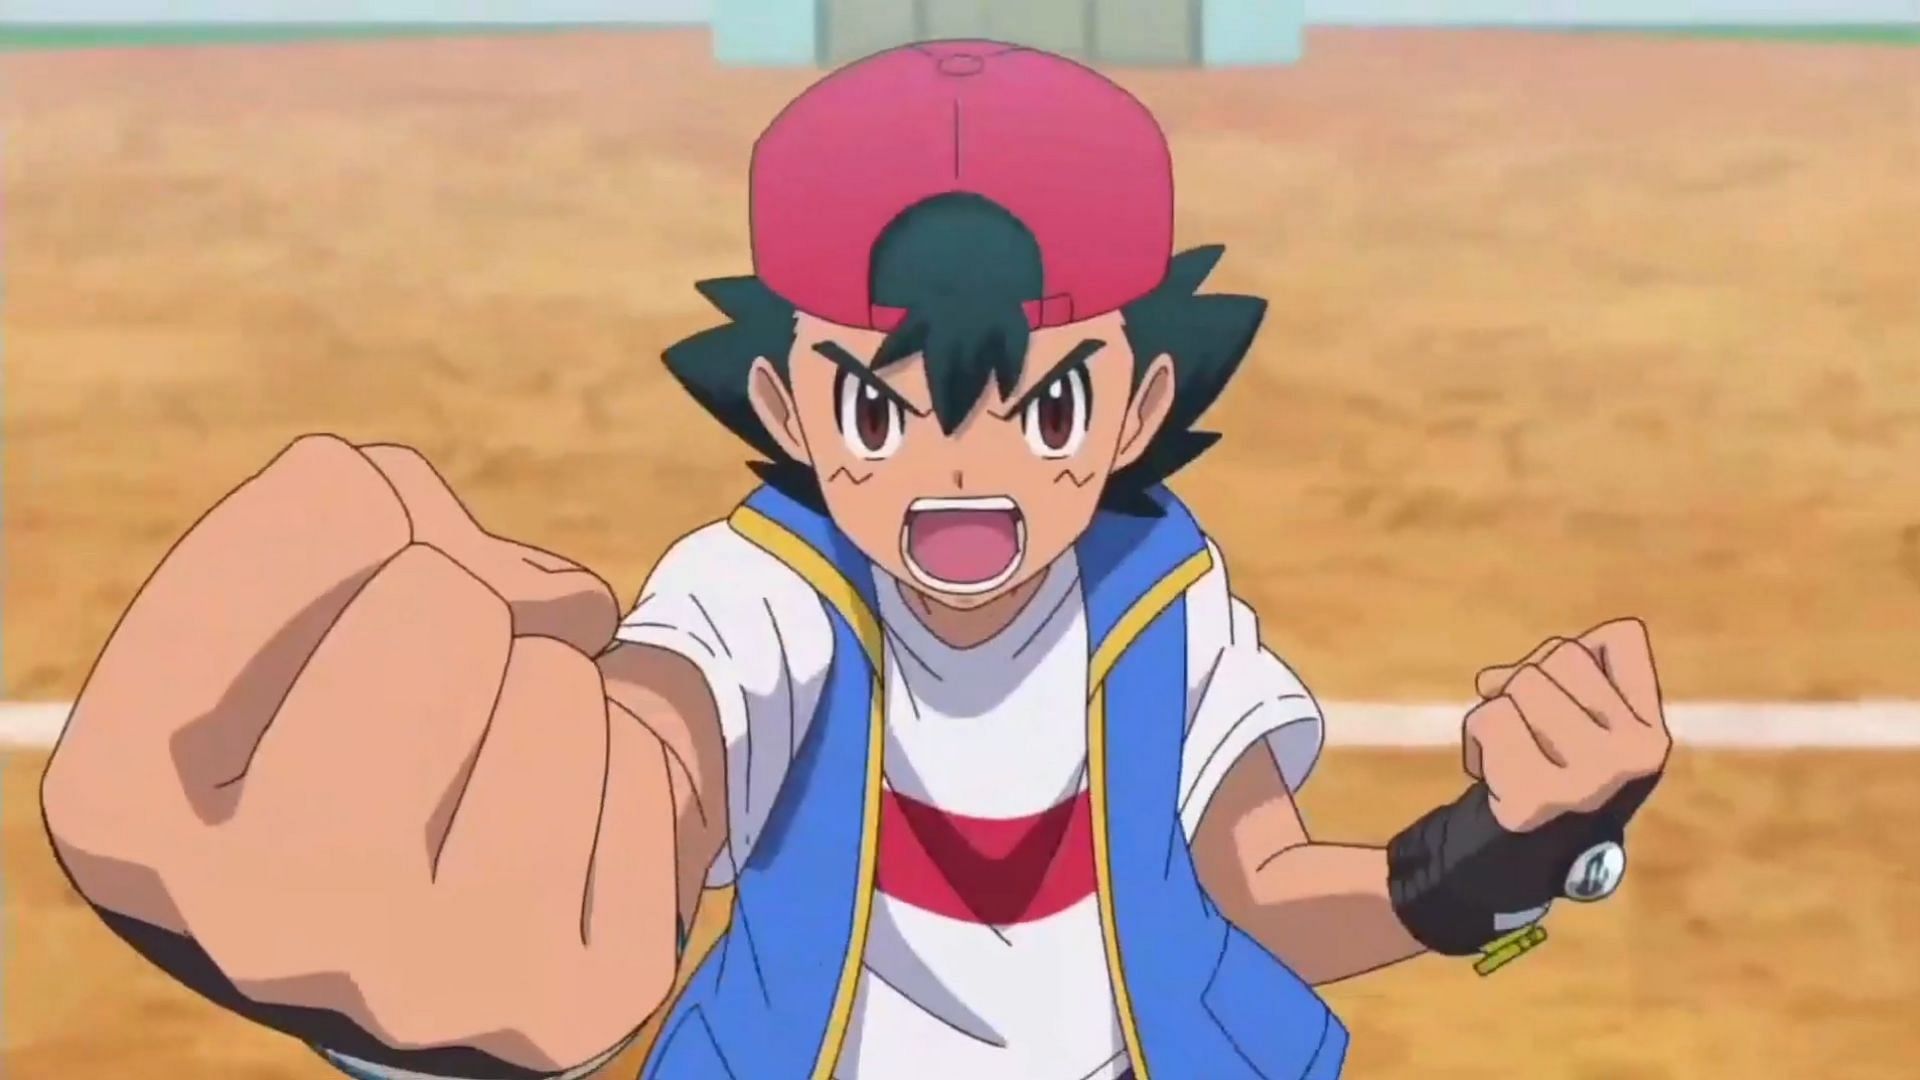 Ash Ketchum might finally finish his journey as the main protagonist of the anime series (Image via OLM, Inc)